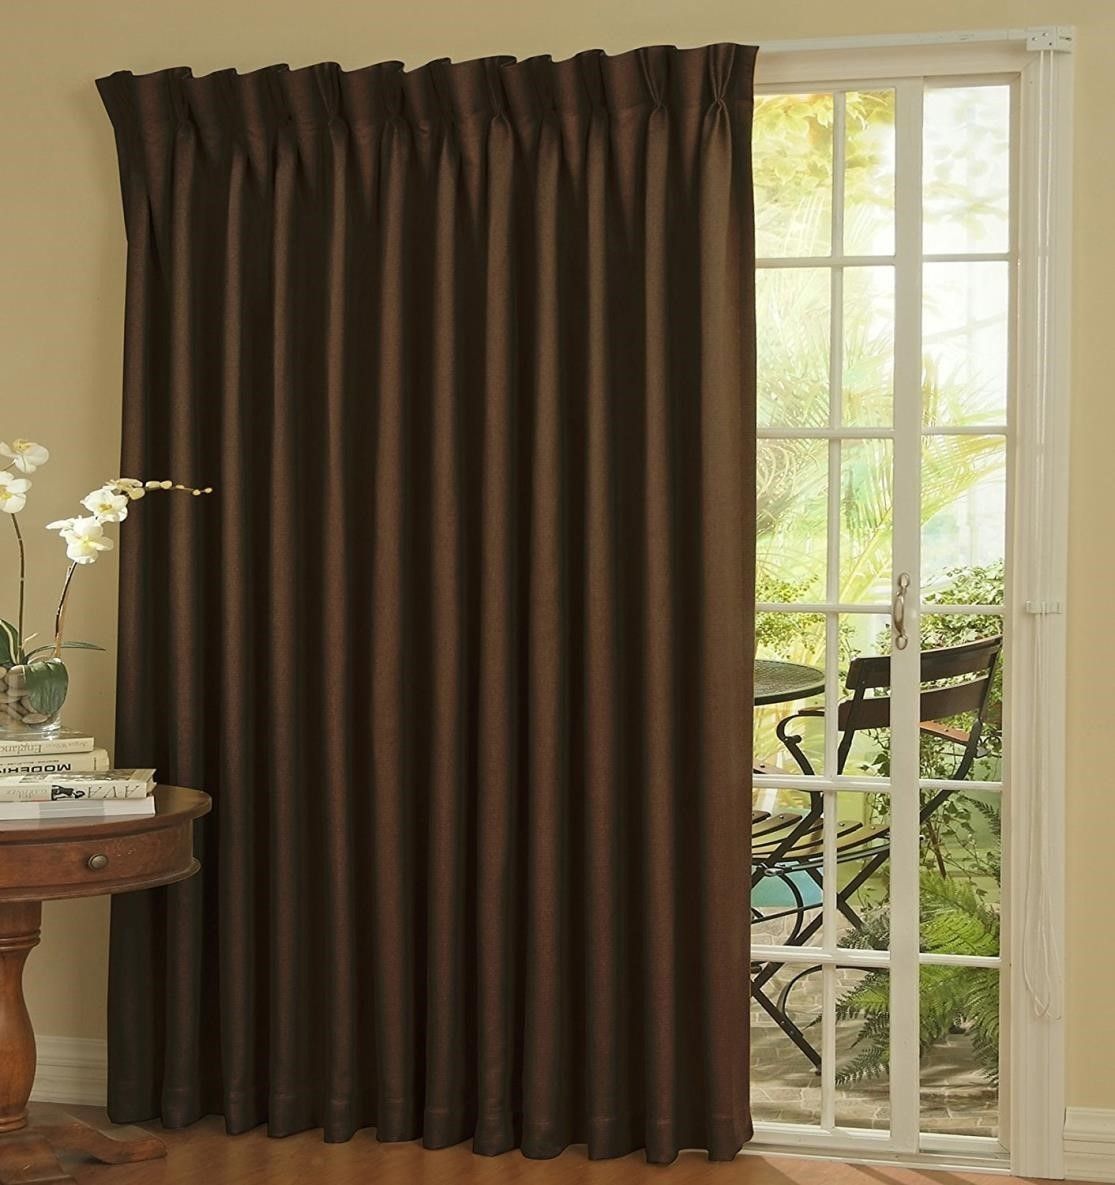 Curtains Luxury Cream Fabric Door Curtain Images About Window Within Fabric Doorway Curtains (View 6 of 15)